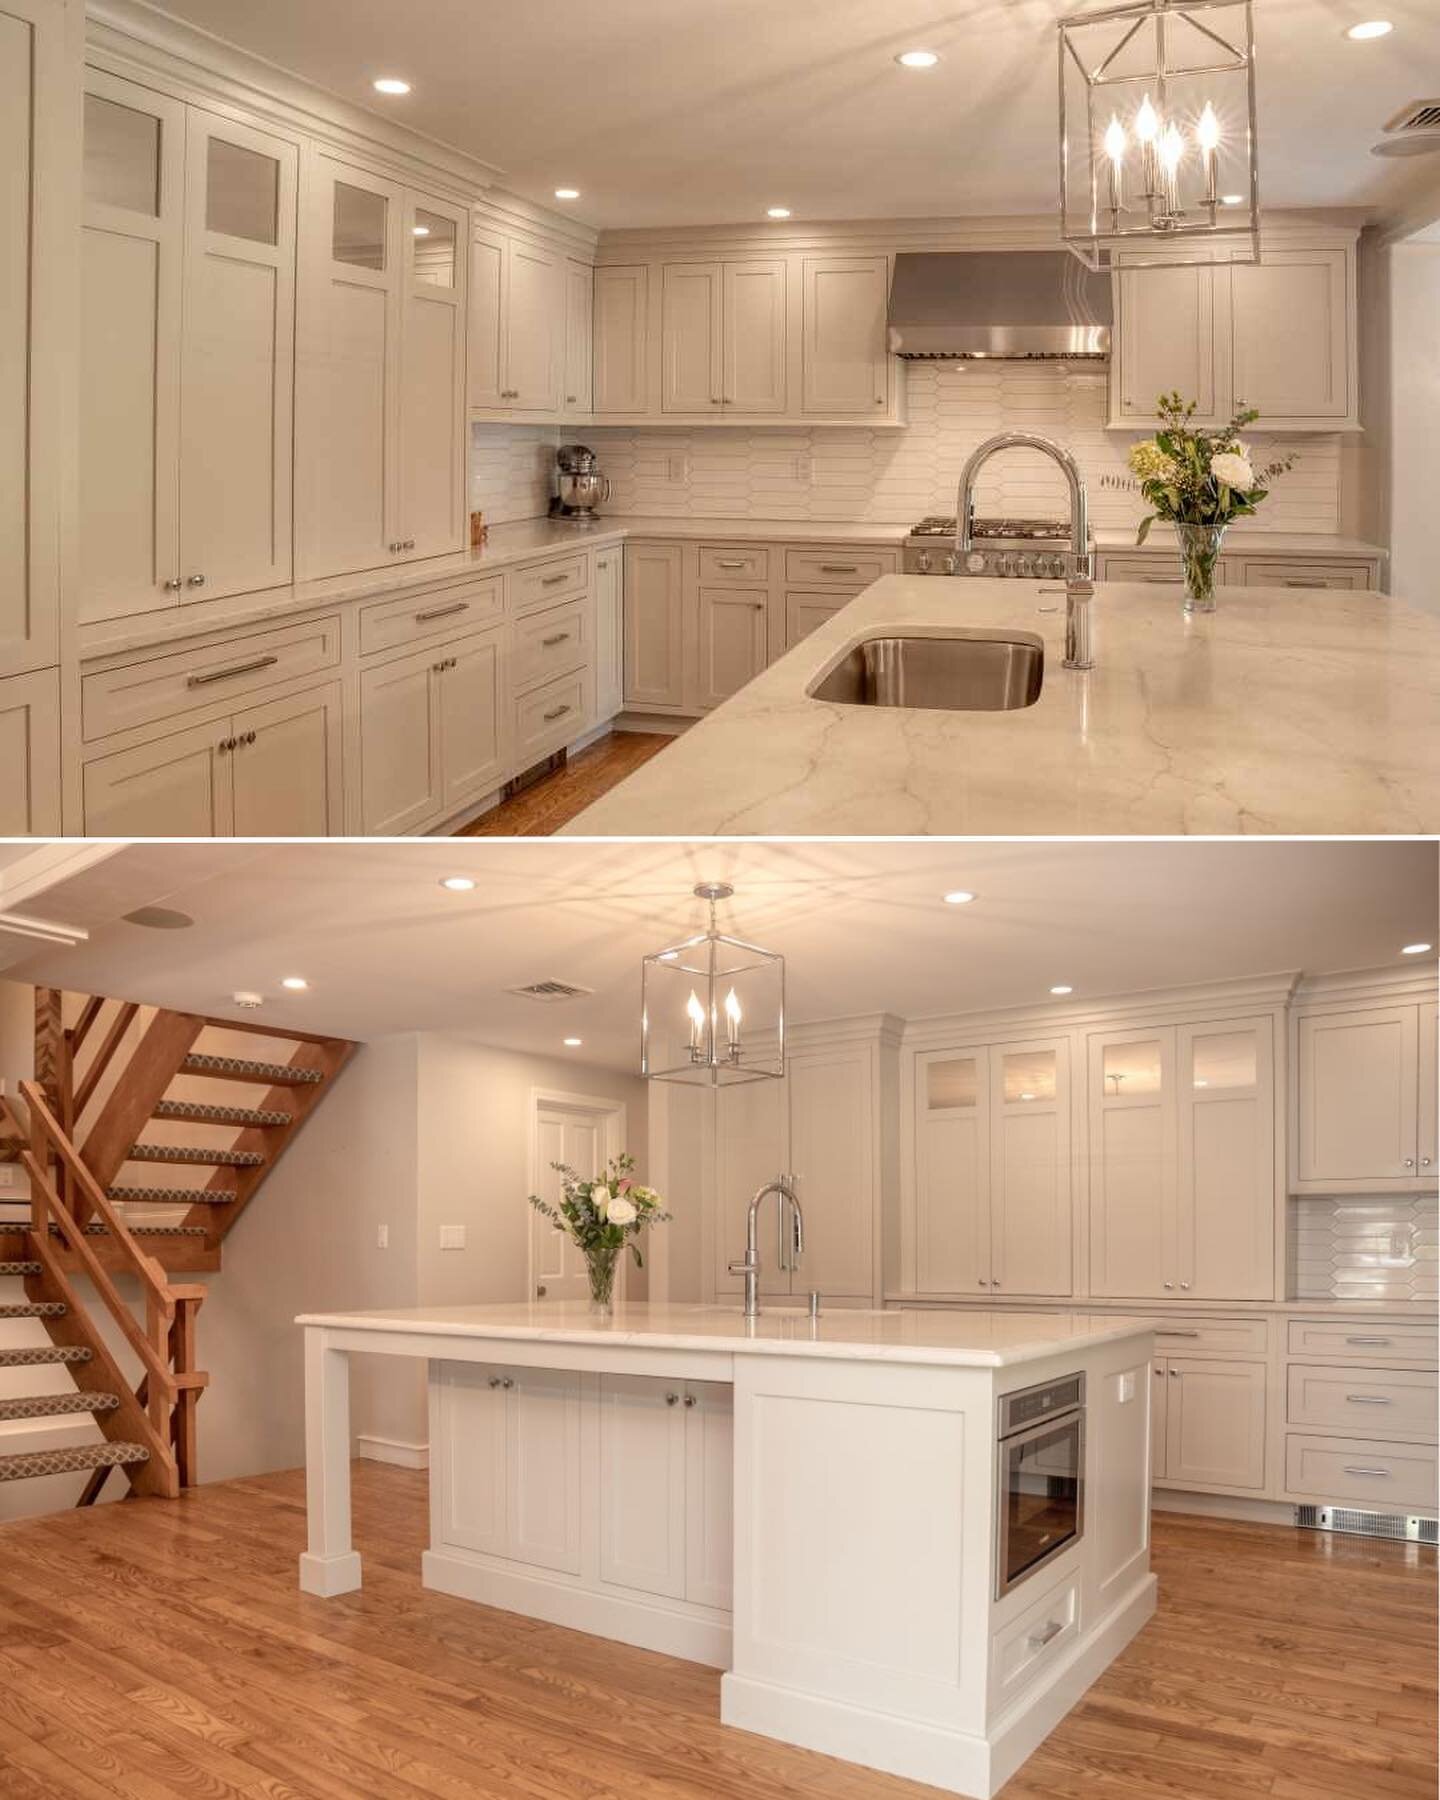 Did you know your return on investment (ROI) on your kitchen renovation can be up to 80%? 📈
 
Liz McCarron is a South Shore Realtor with 20+ years of real estate experience and she chose The Cabinetry for her own kitchen renovation a few years ago. 